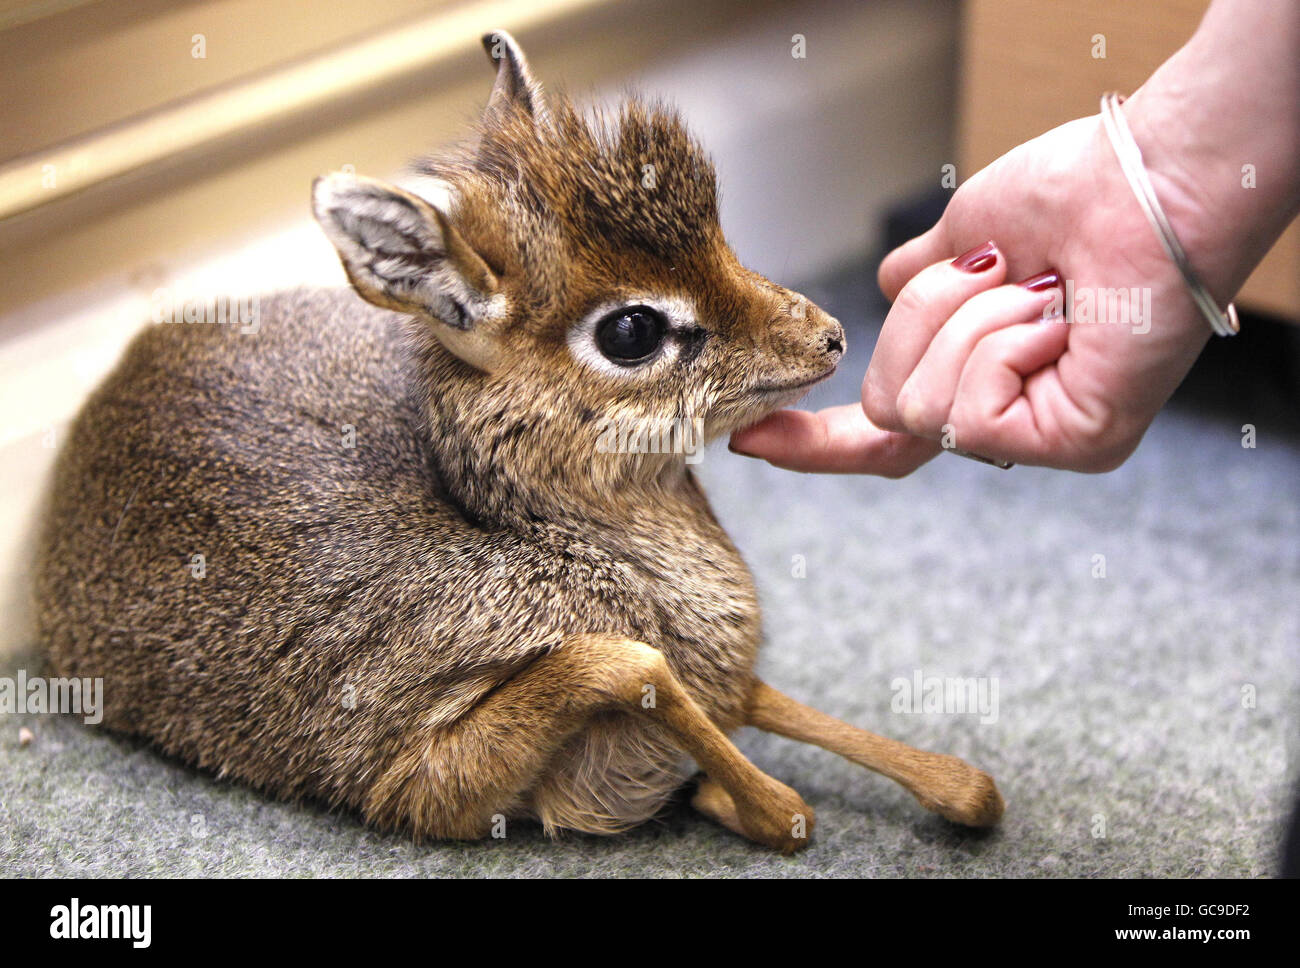 Curator of mammals at Chester Zoo, Tim Rowlands, with a baby dik dik antelope which is being hand reared after it was abandoned by its mother. Stock Photo